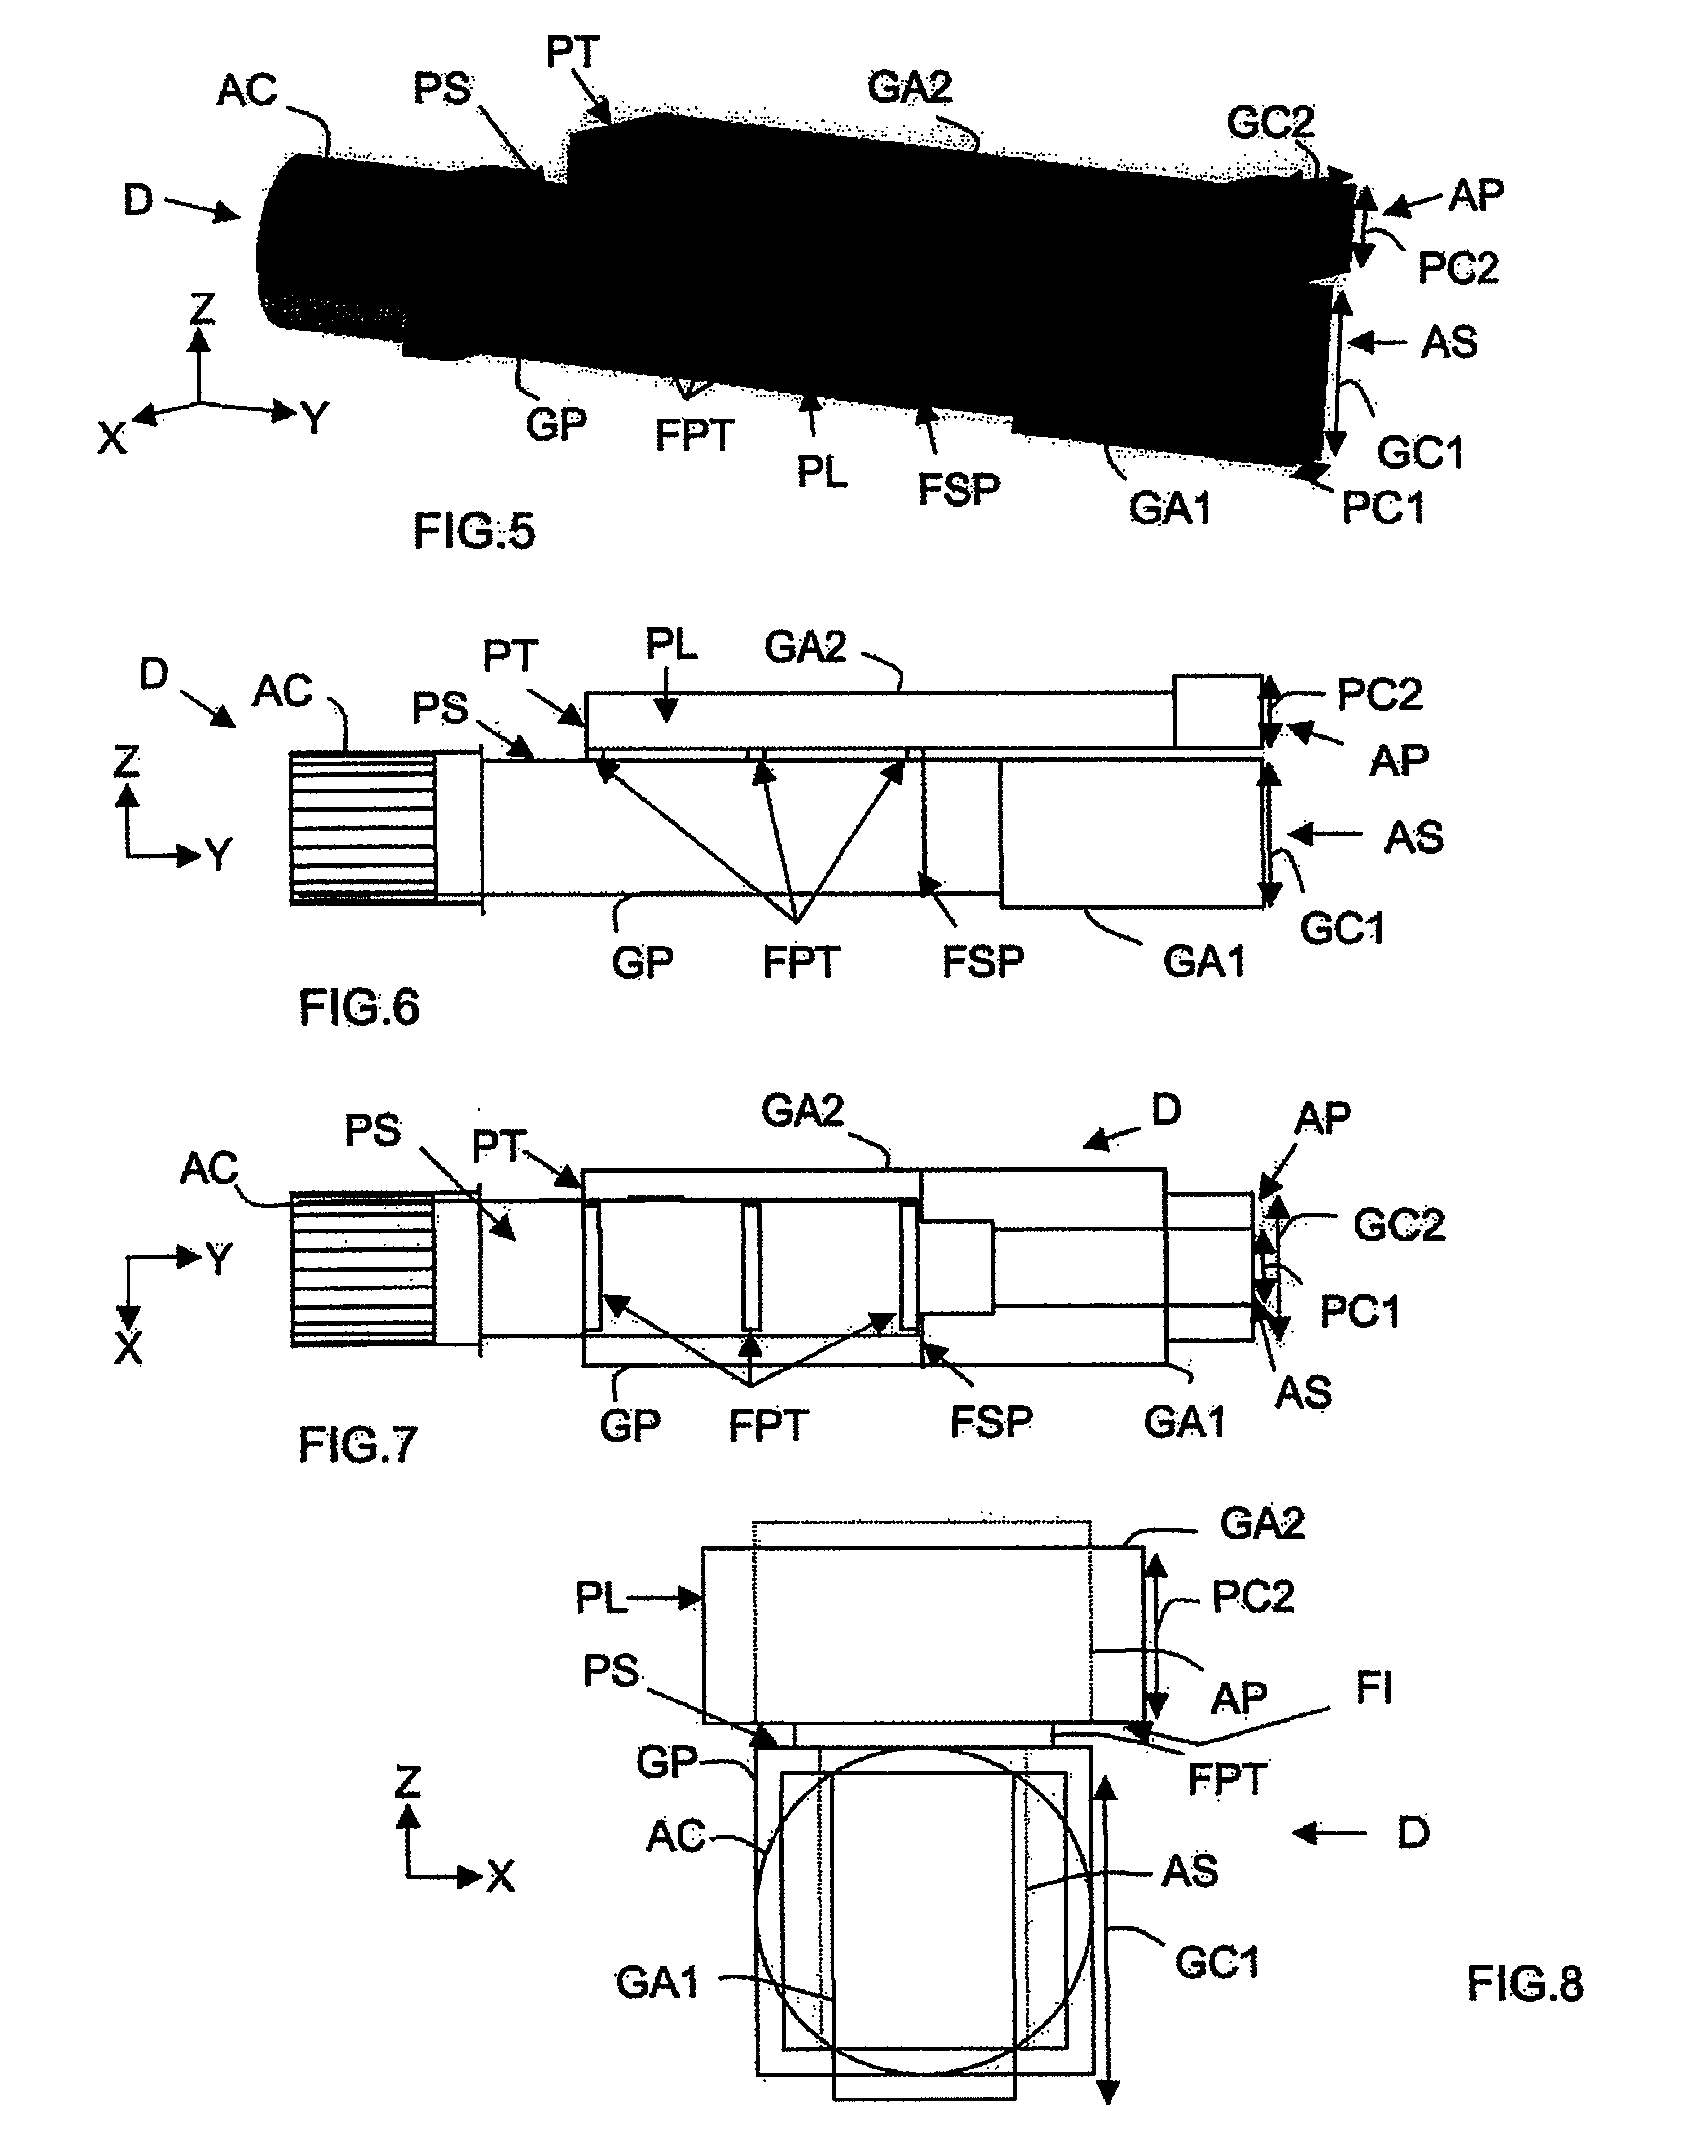 Compact Orthomode Transduction Device Optimized in the Mesh Plane, for an Antenna